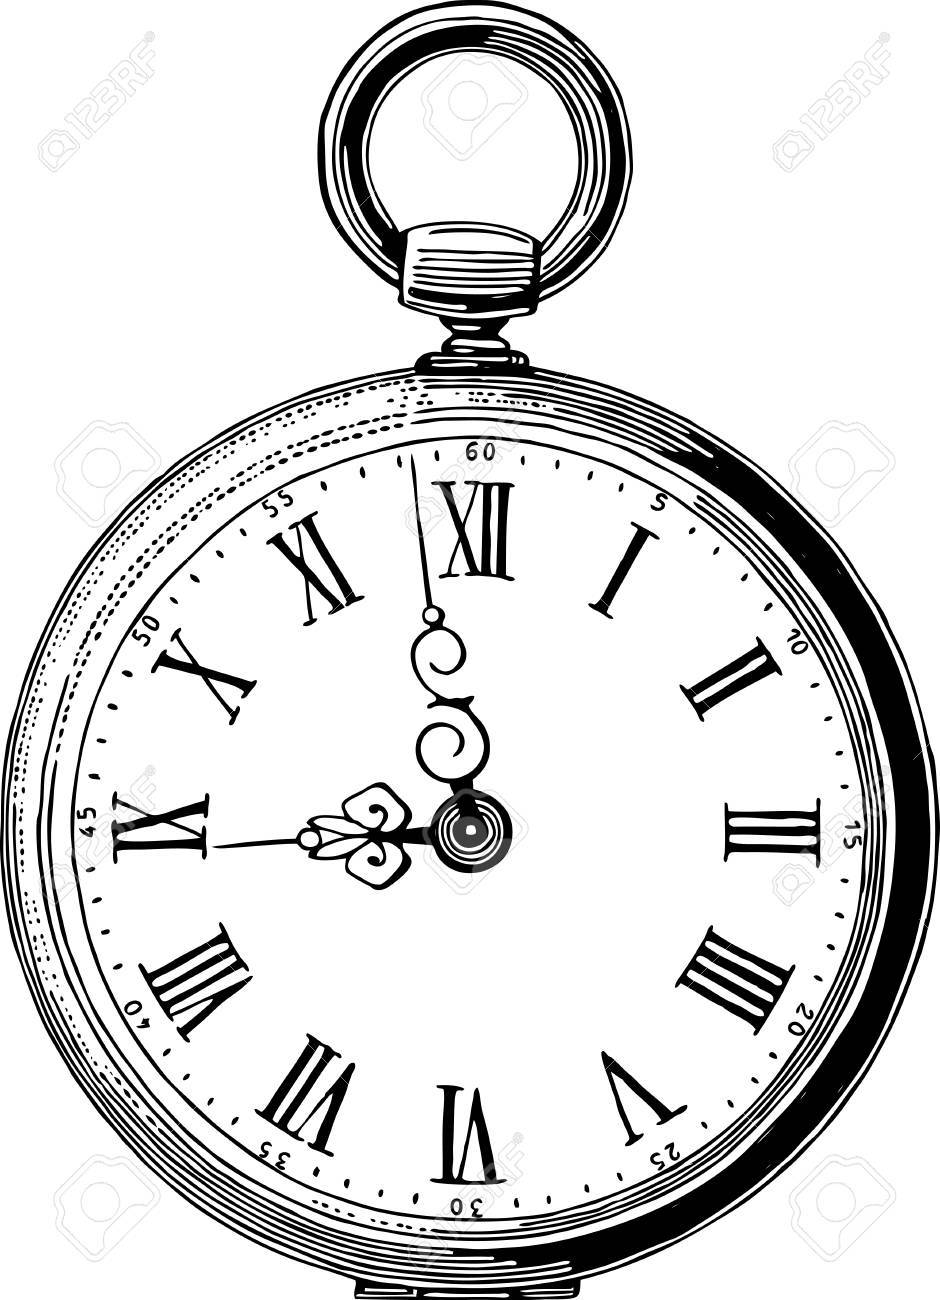 Vintage Pocket Watch Drawing | Free download on ClipArtMag